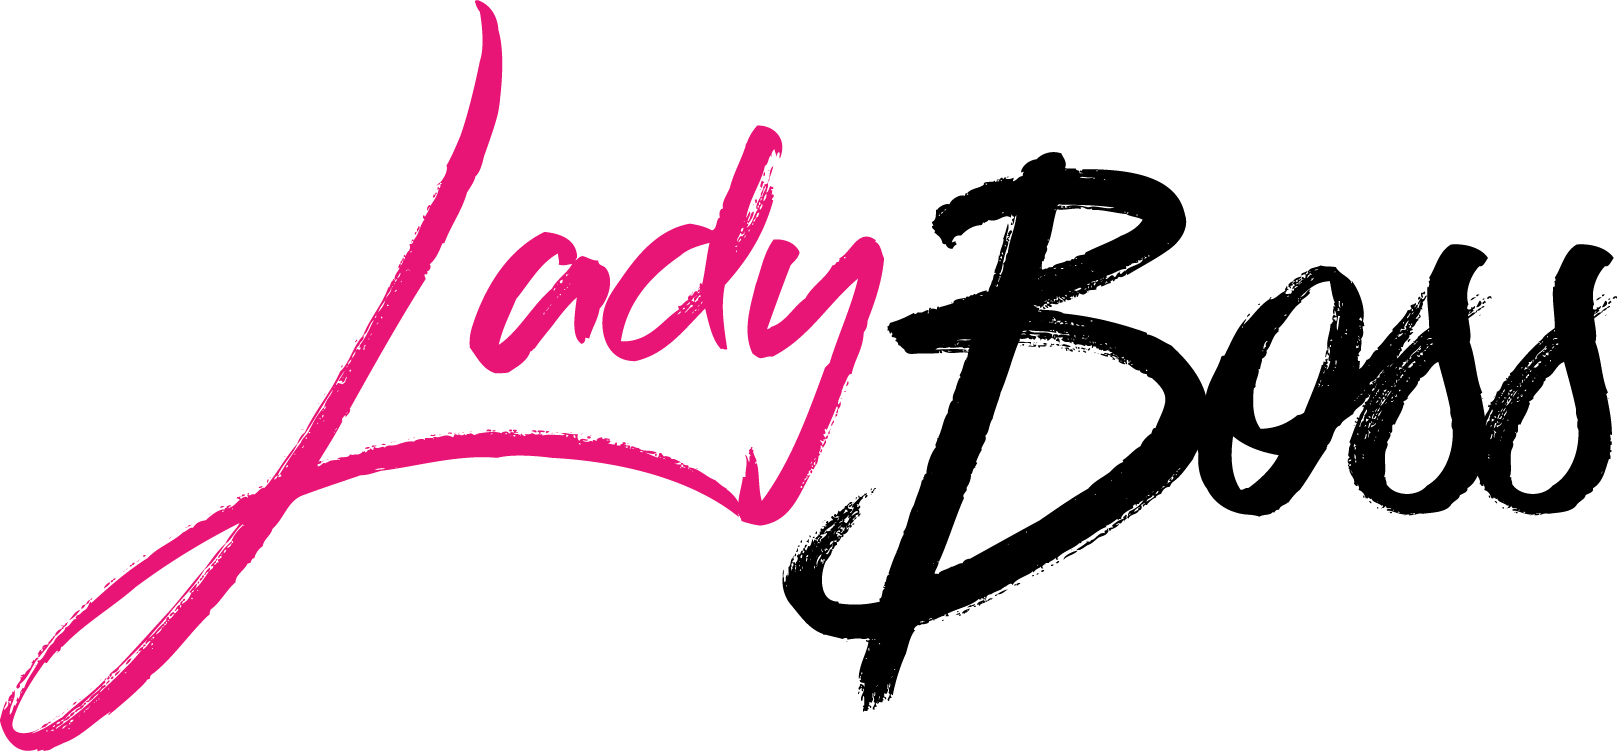 In 2018, LadyBoss achieved $32.4 million in revenue by serving more than 175,000 women. The company is on track to nearly double these numbers by 2020.